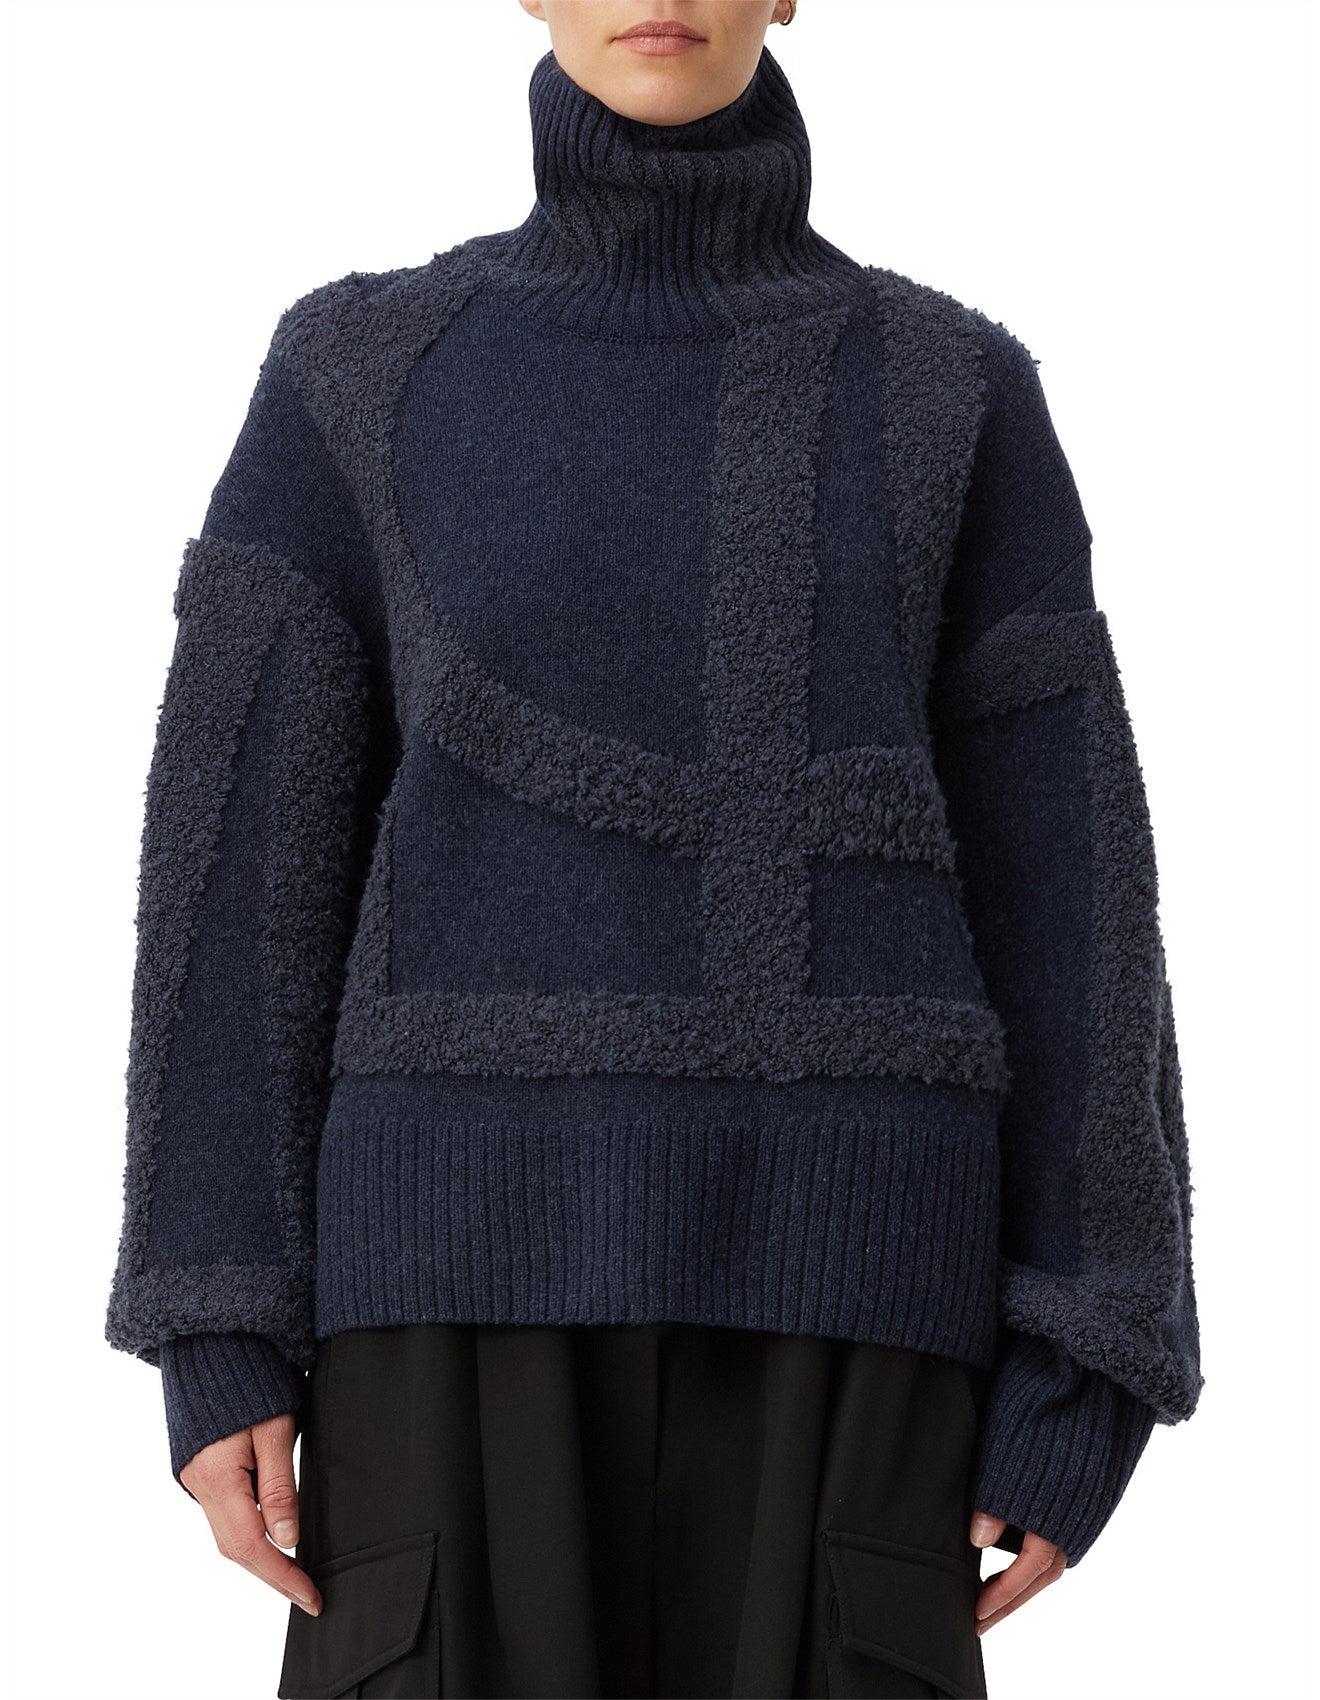 Camilla And Marc | Obsidian Turtleneck Jumper - Charcoal